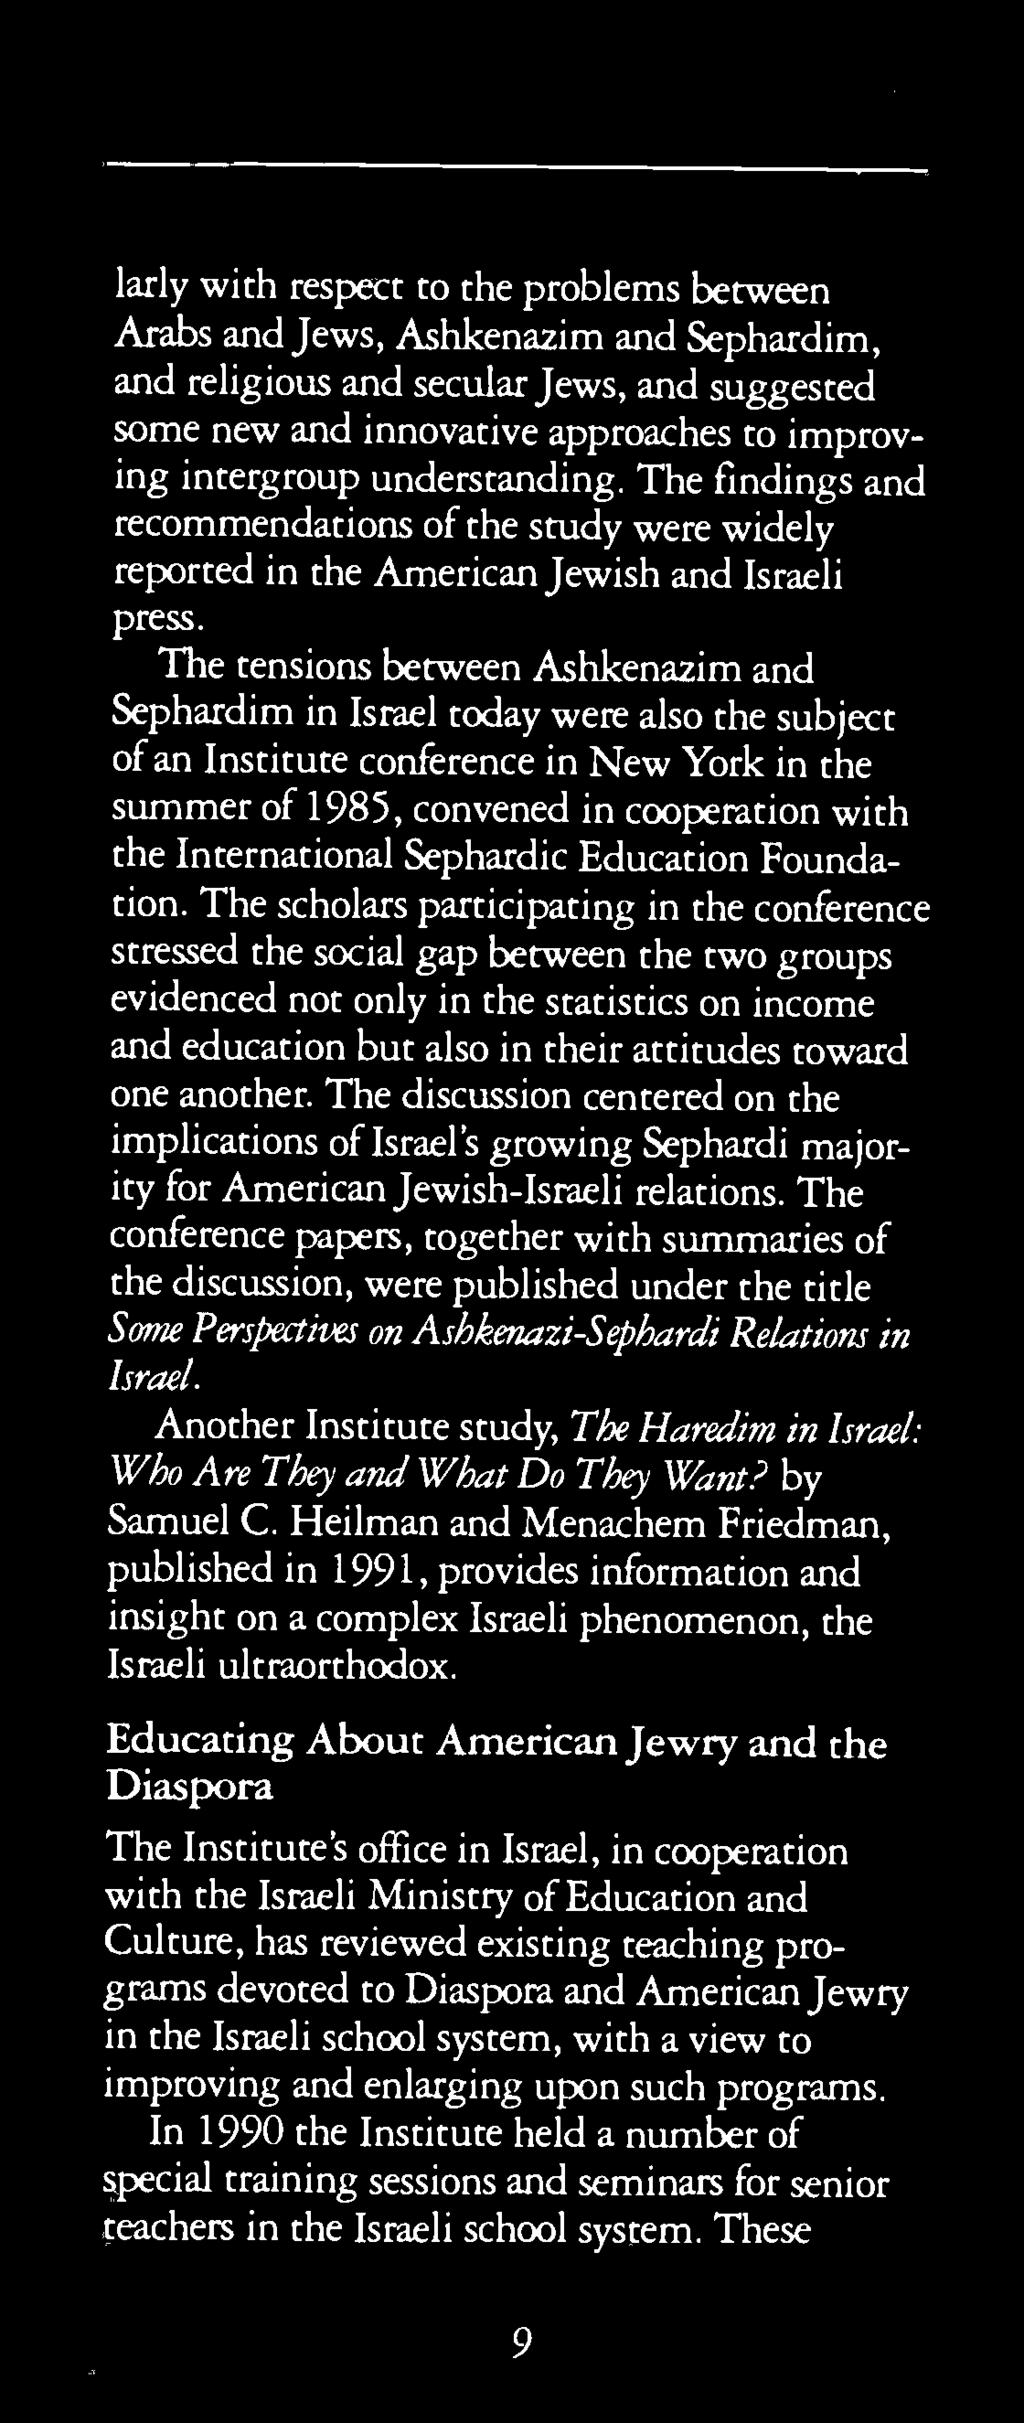 The tensions between Ashkenazim and Sephardim in Israel today were also the subject of an Institute conference in New York in the summer of 1985, convened in cooperation with the International